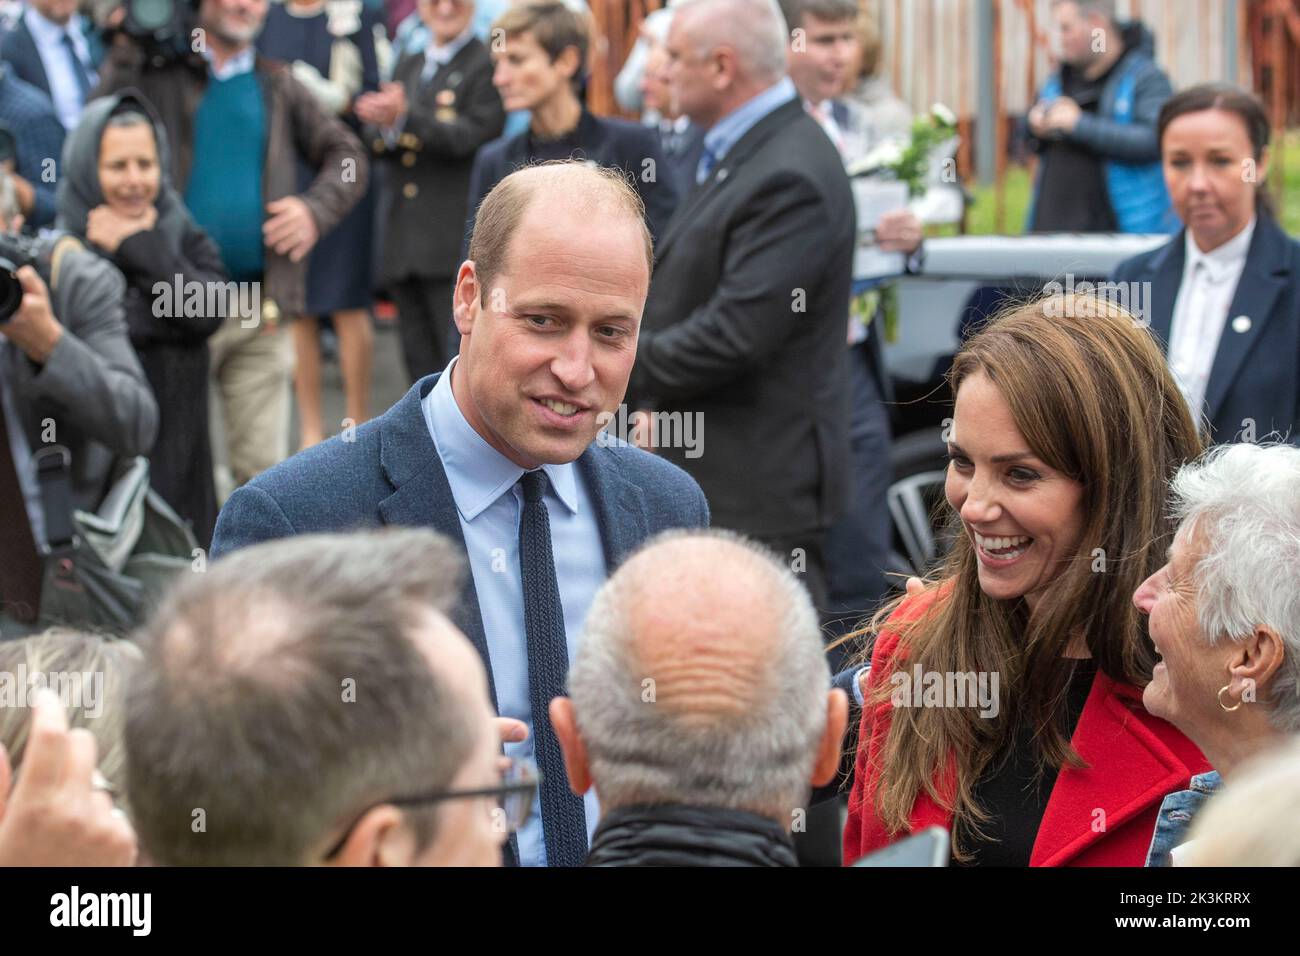 Swansea, UK. 27th Sep, 2022. Prince William and Catherine Princess of Wales chatting with local people during their visit to Swansea this afternoon. The royal pair visited St Thomas church in Swansea which supports people in the local area and across Swansea. The church is home to a foodbank that supports over 200 people per week and Swansea Baby Basics, which distribute essential items for vulnerable mothers, such as toiletries and clothes. Credit: Phil Rees/Alamy Live News Stock Photo